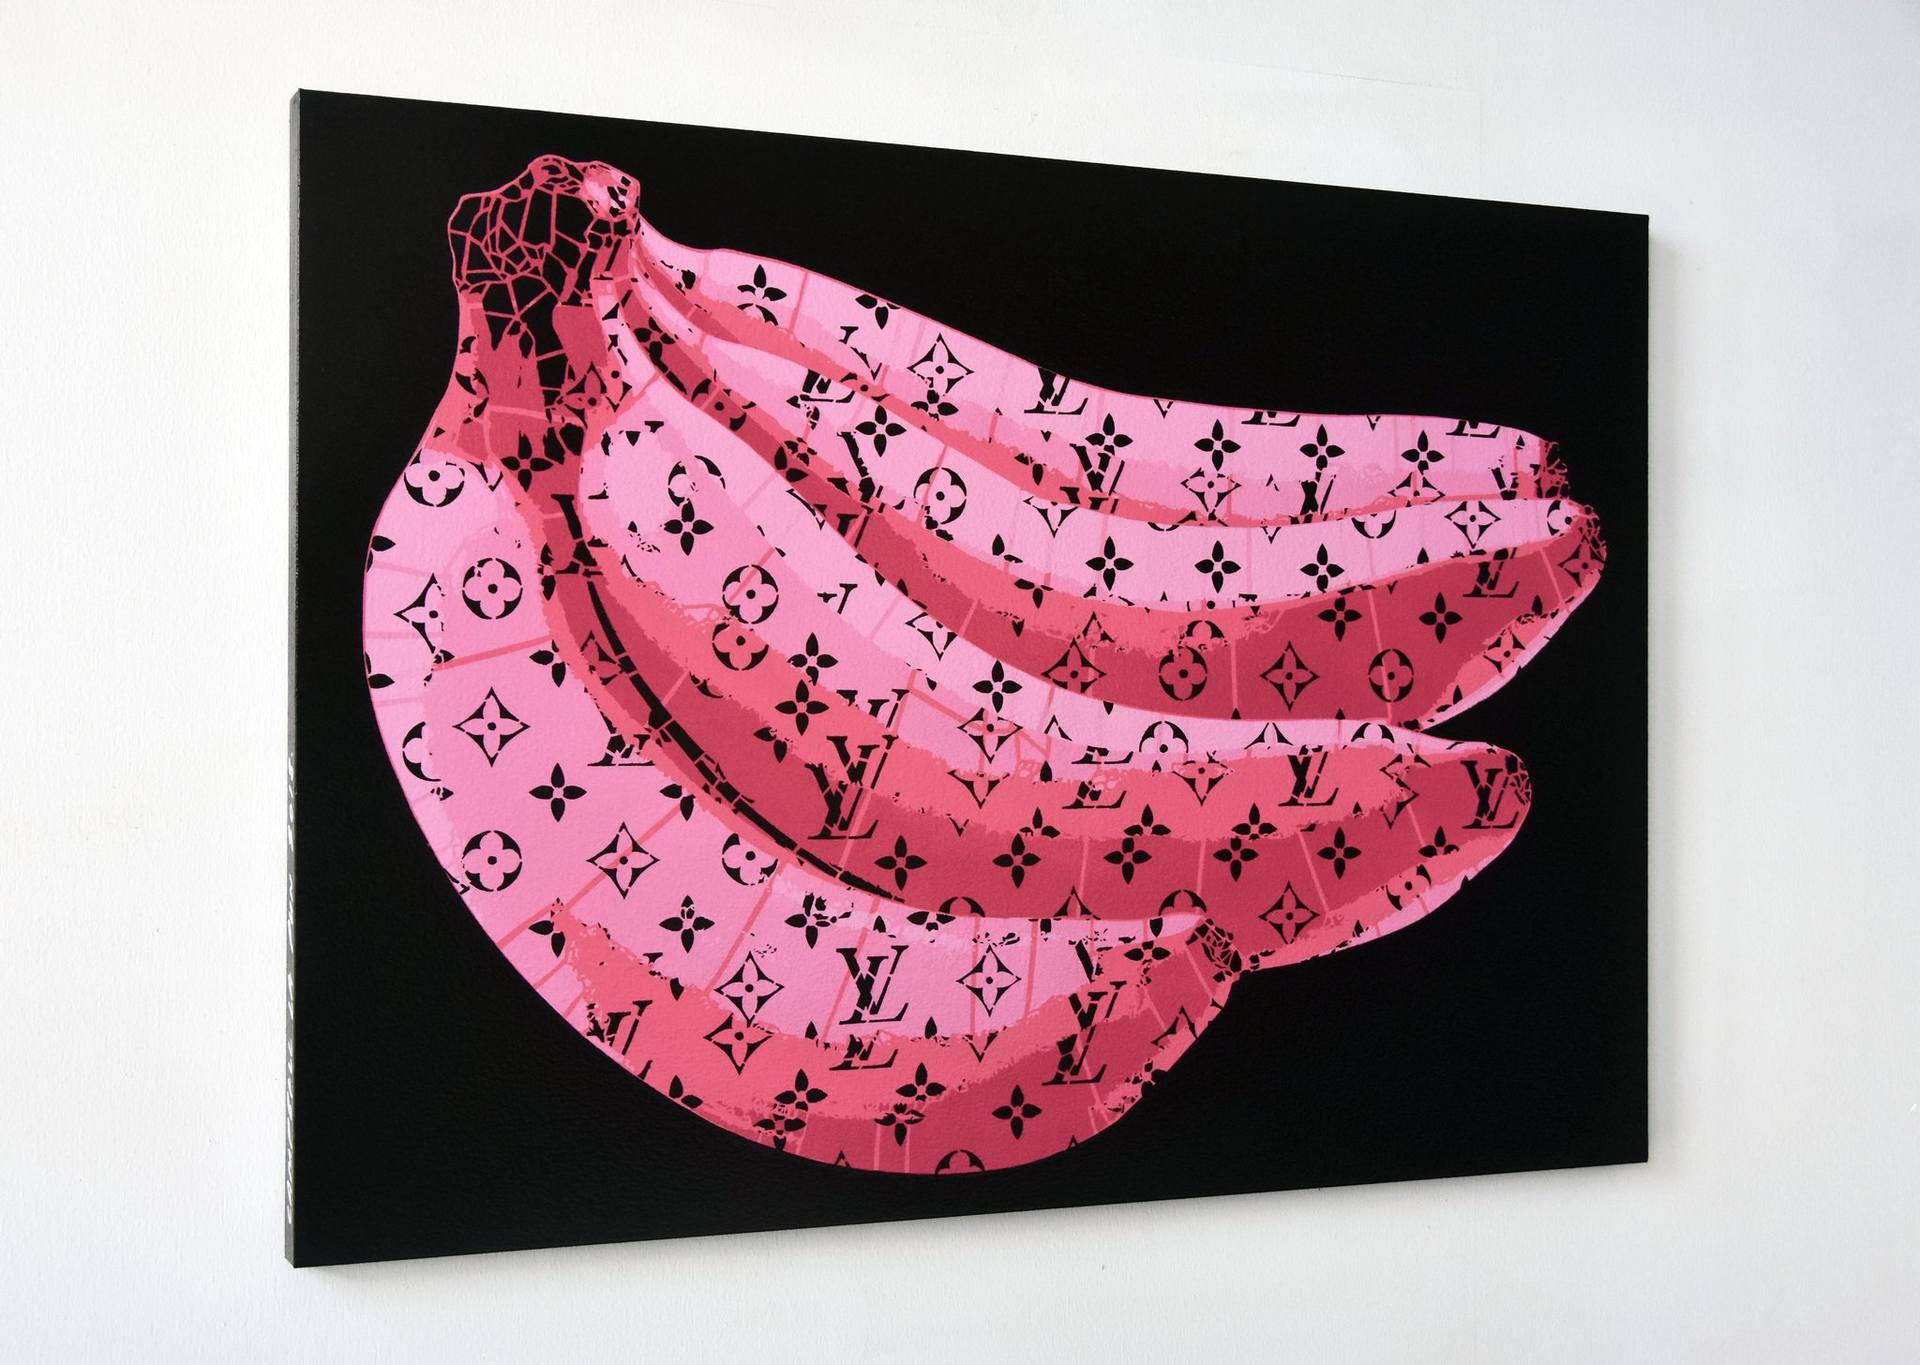 LV Banana Candy - JPN Edition (Ed. 5 of 6) Painting by Campbell La